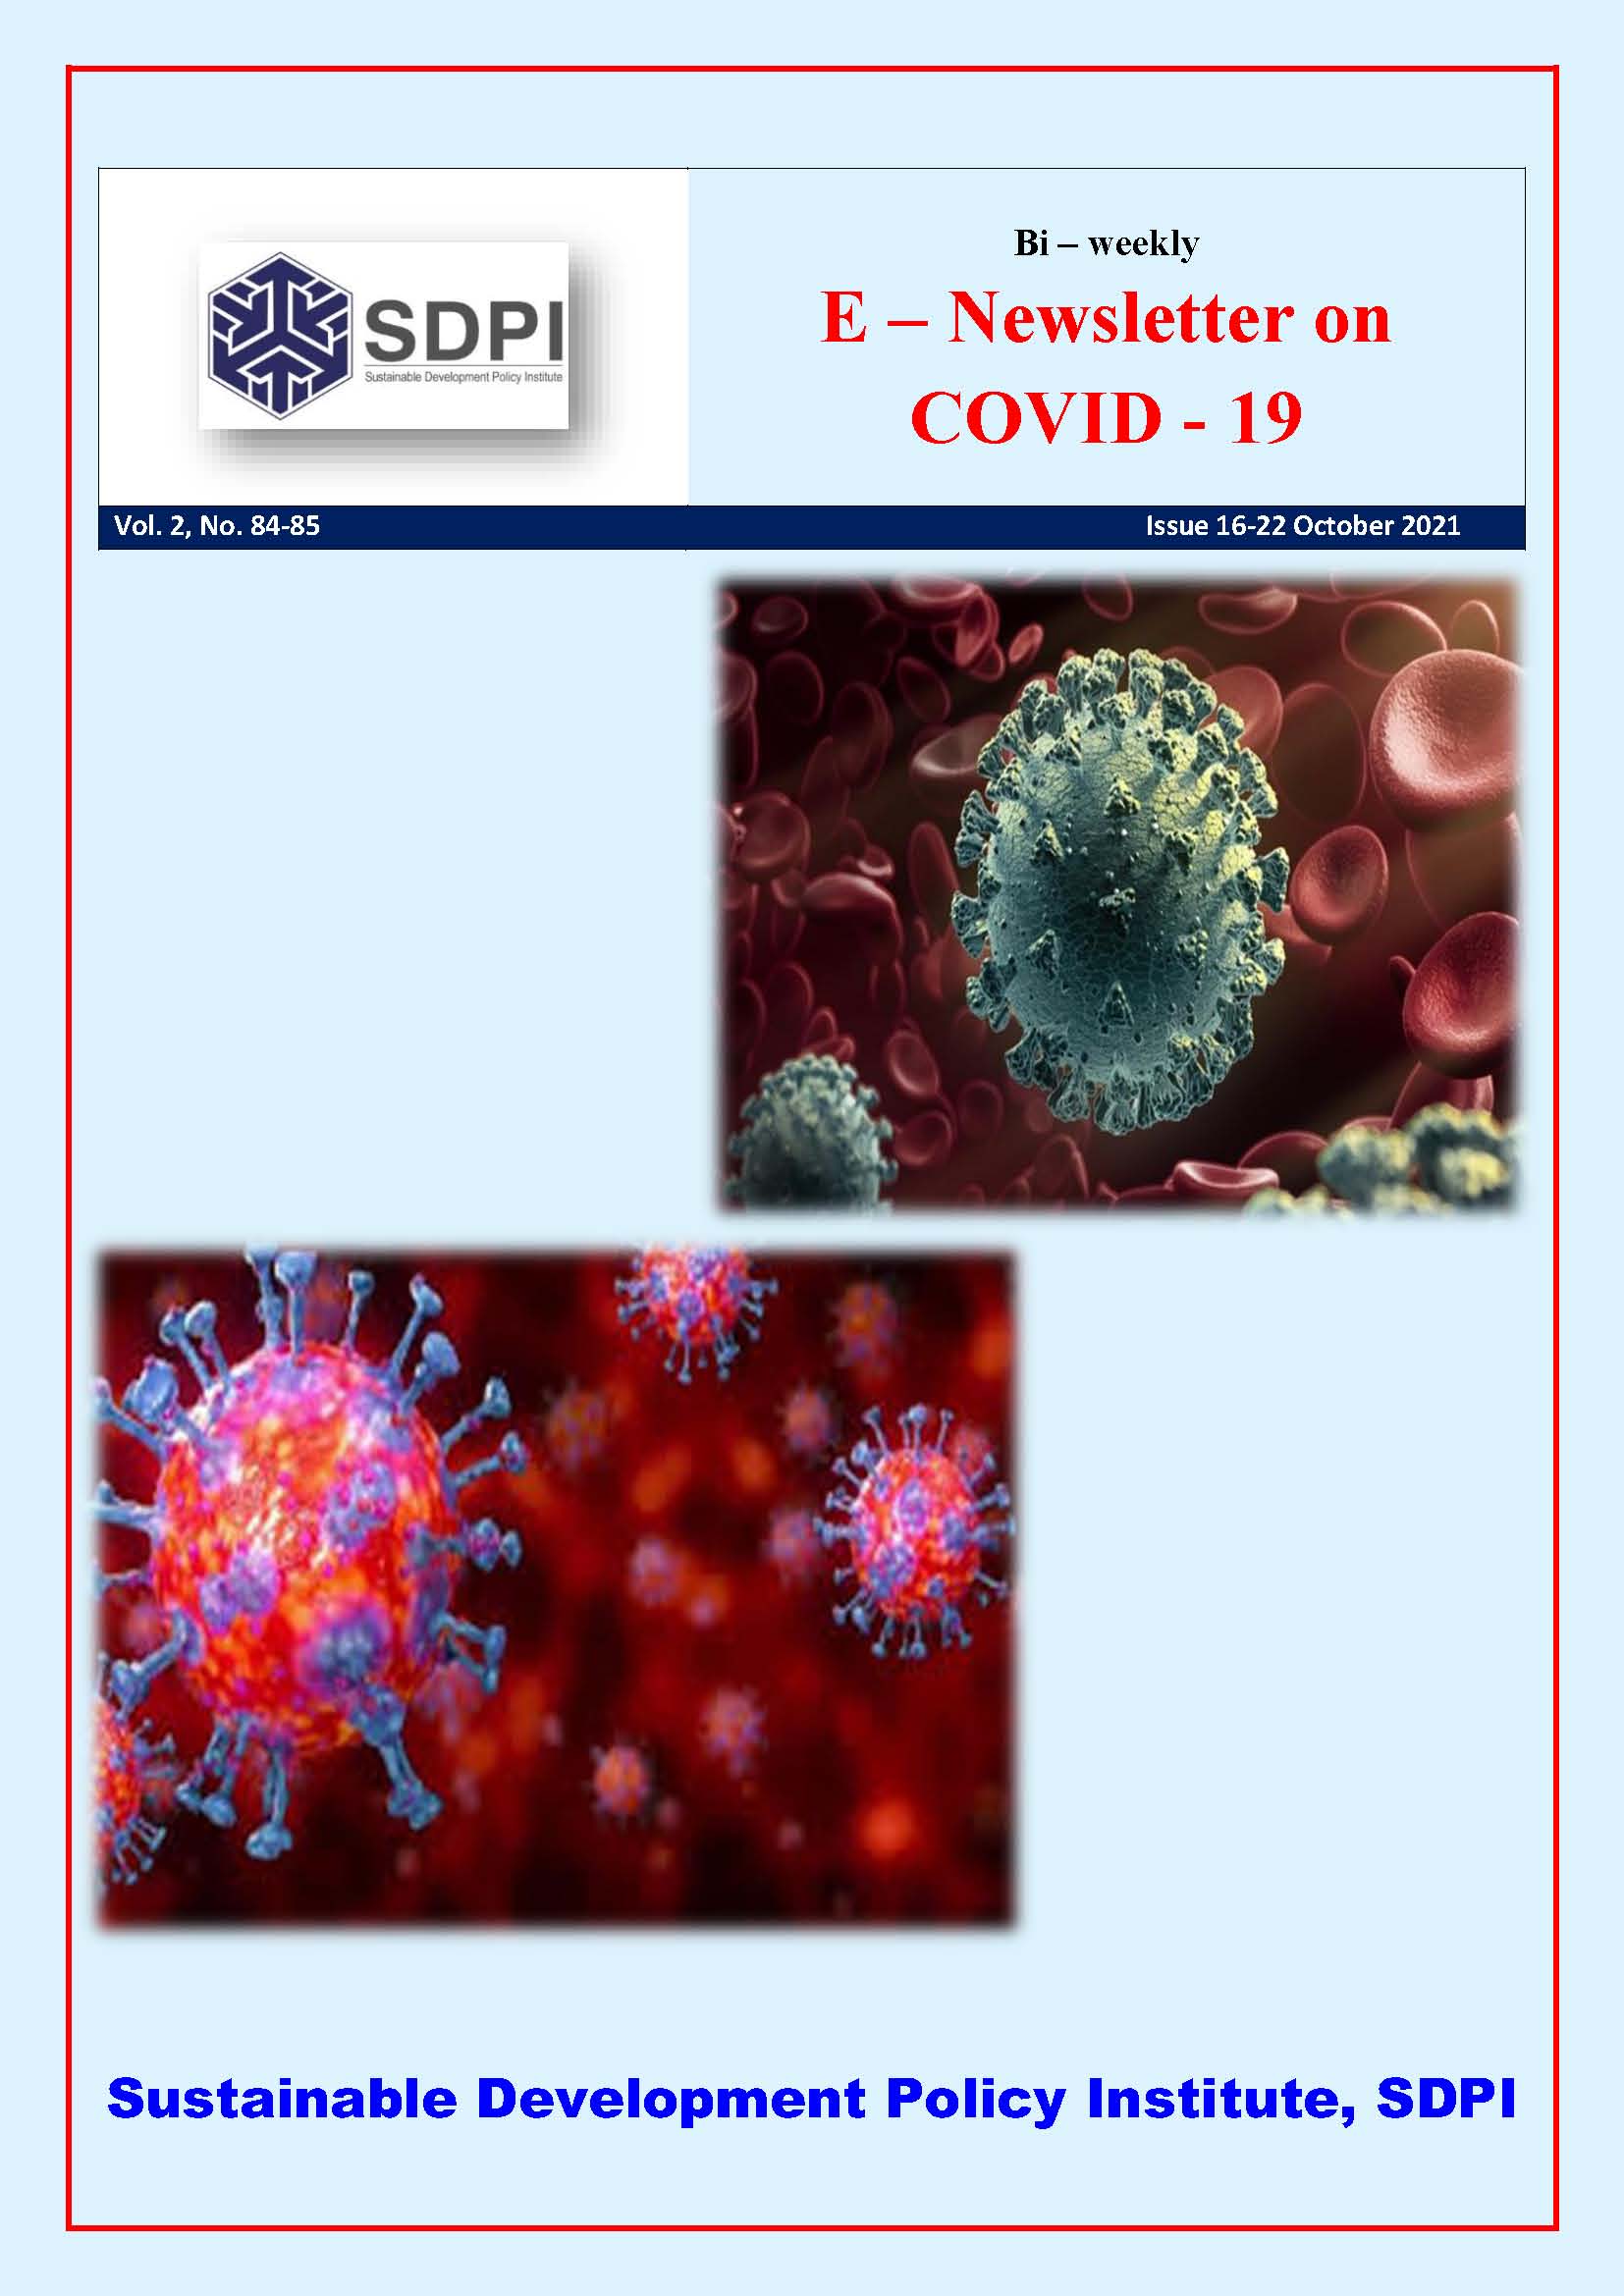 E-Newsletter on COVID-19 Vol. 2, No. 84-85,16-22 October 2021